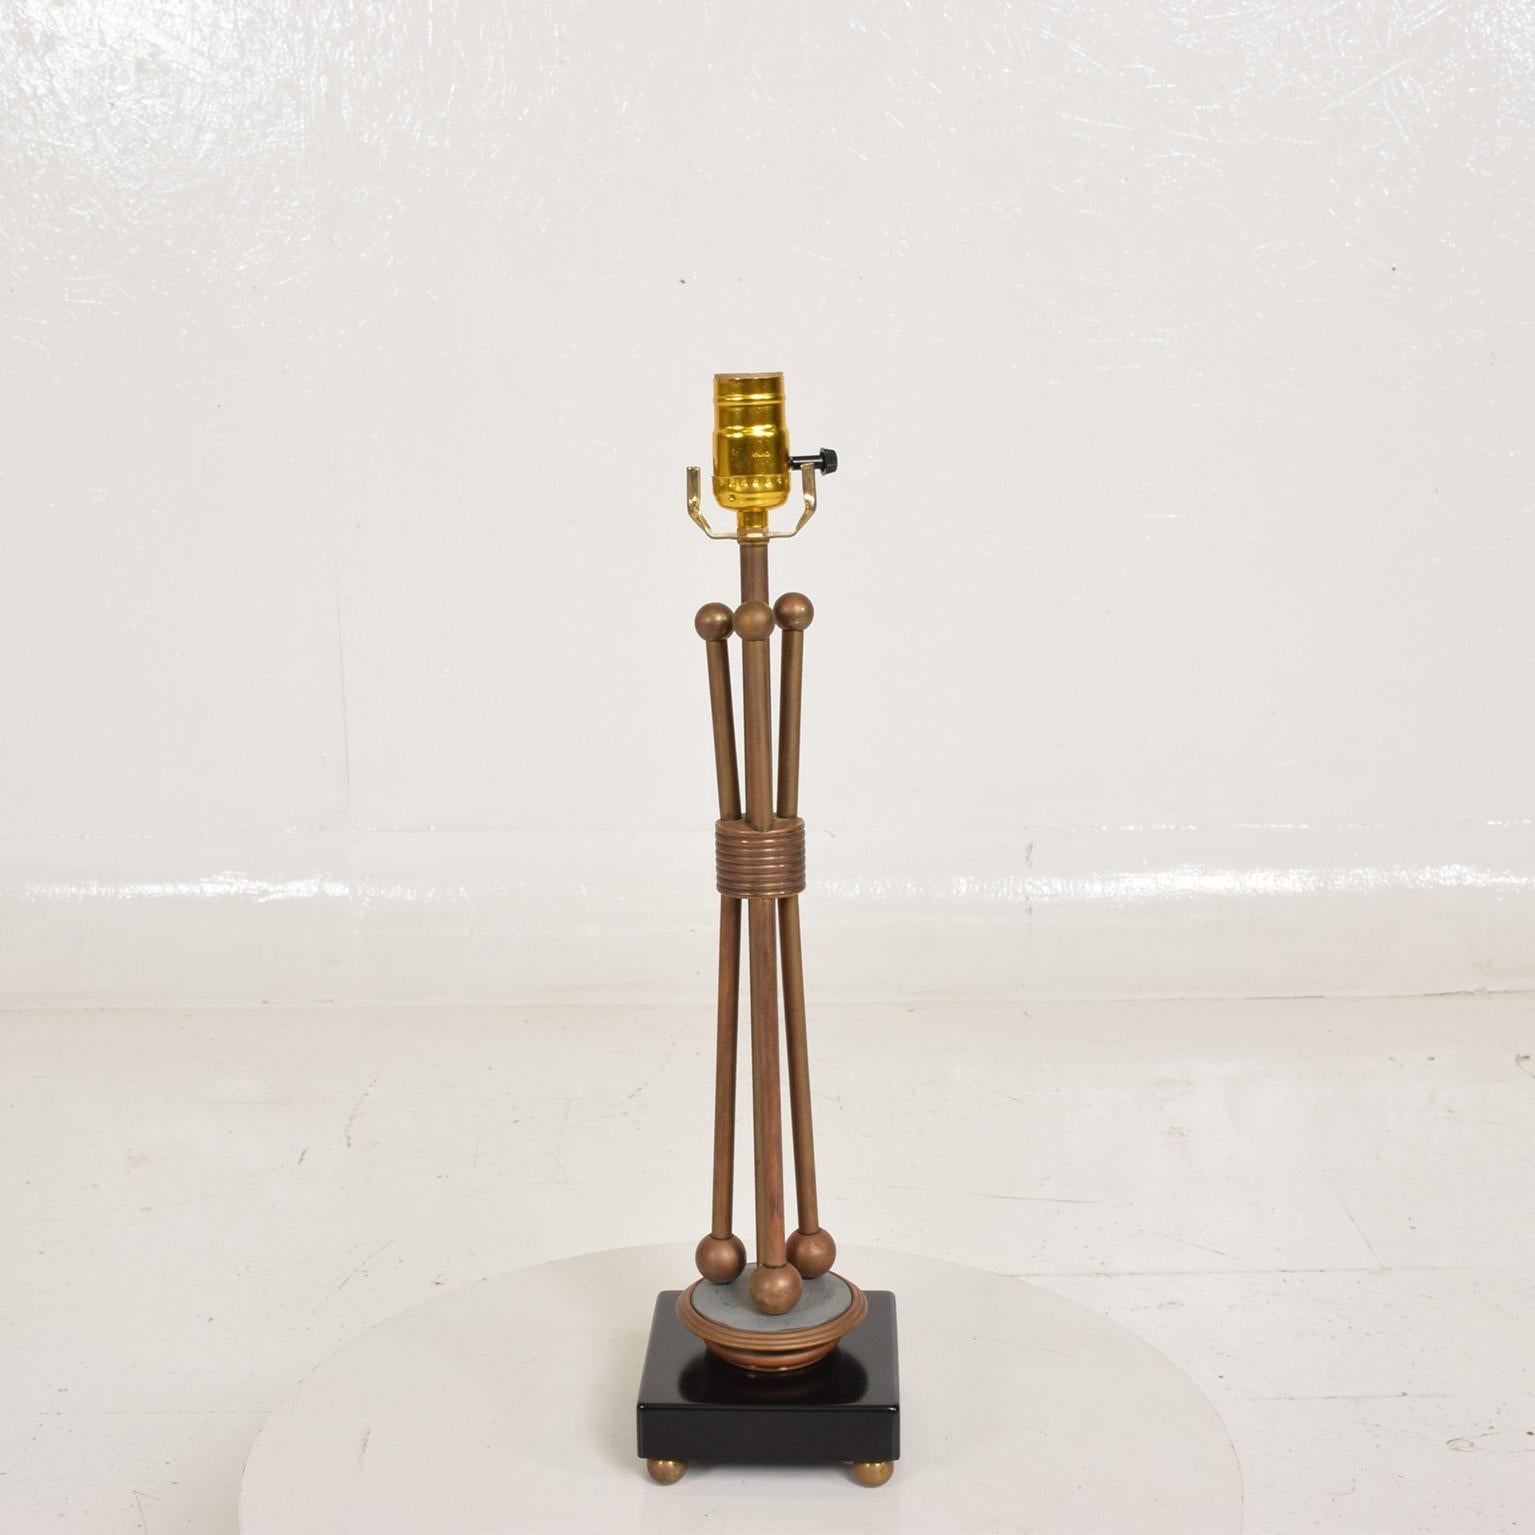 For your consideration, a midcentury Mexican modernist table lamp attributed to Arturo Pani Hollywood Regency era.


Made in Mexico, circa early 1960s. Constructed with brass and aluminium painted in black.


No shade included for props only,